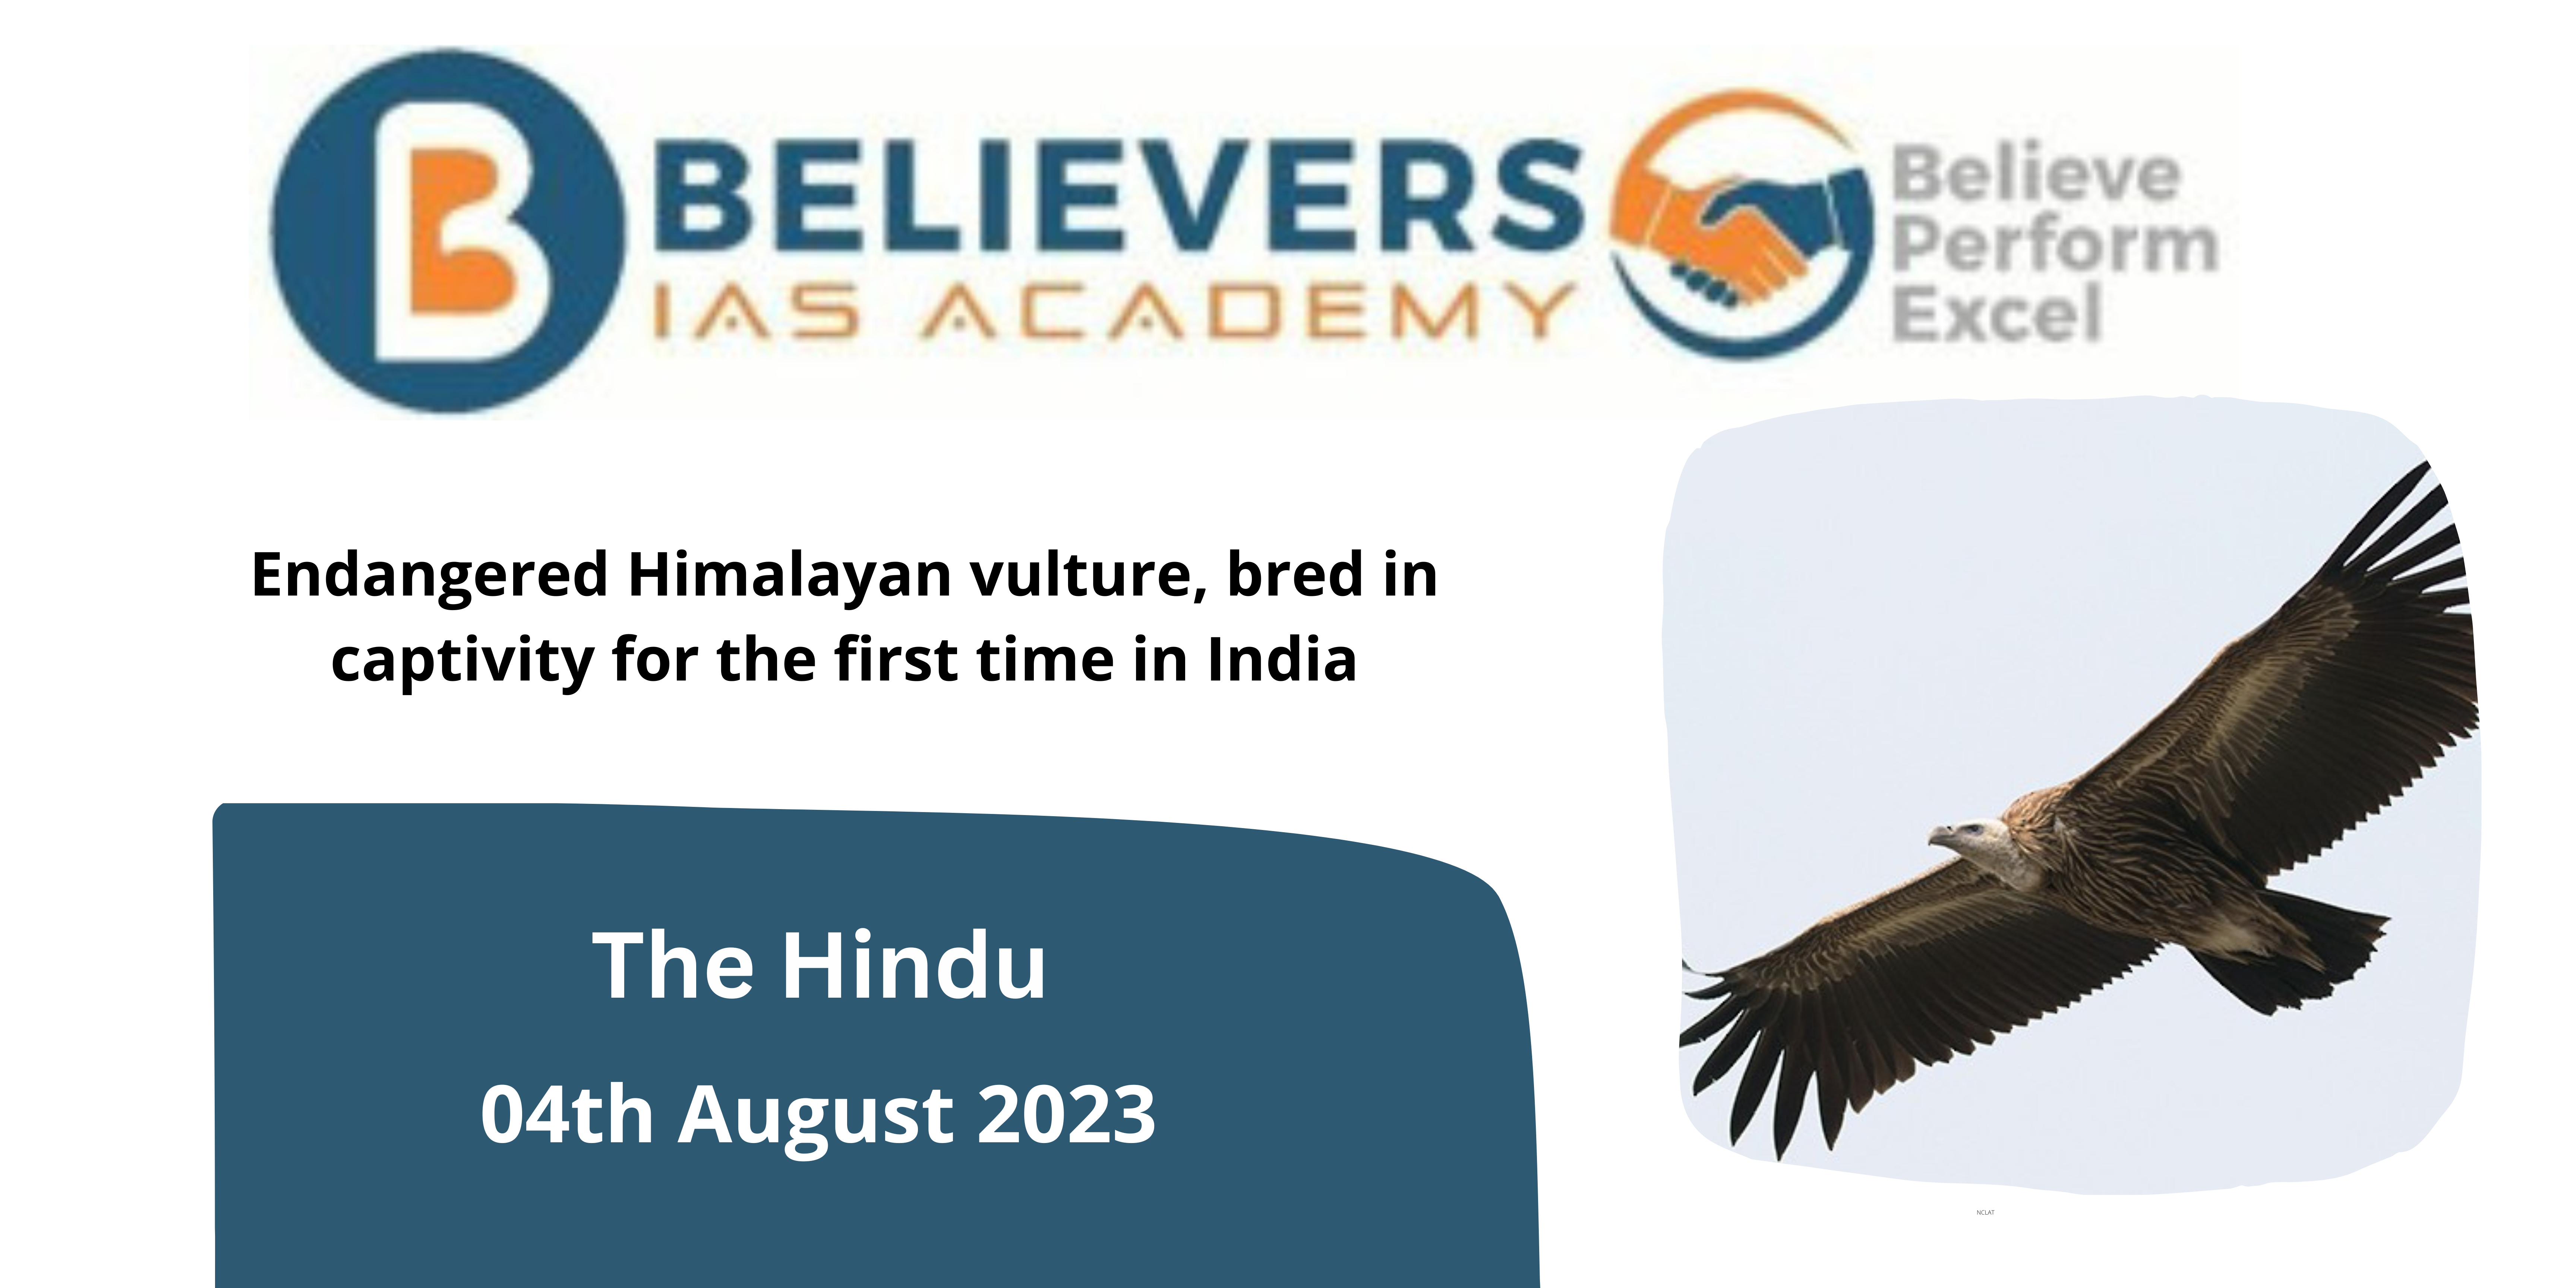 Endangered Himalayan vulture, bred in captivity for the first time in India